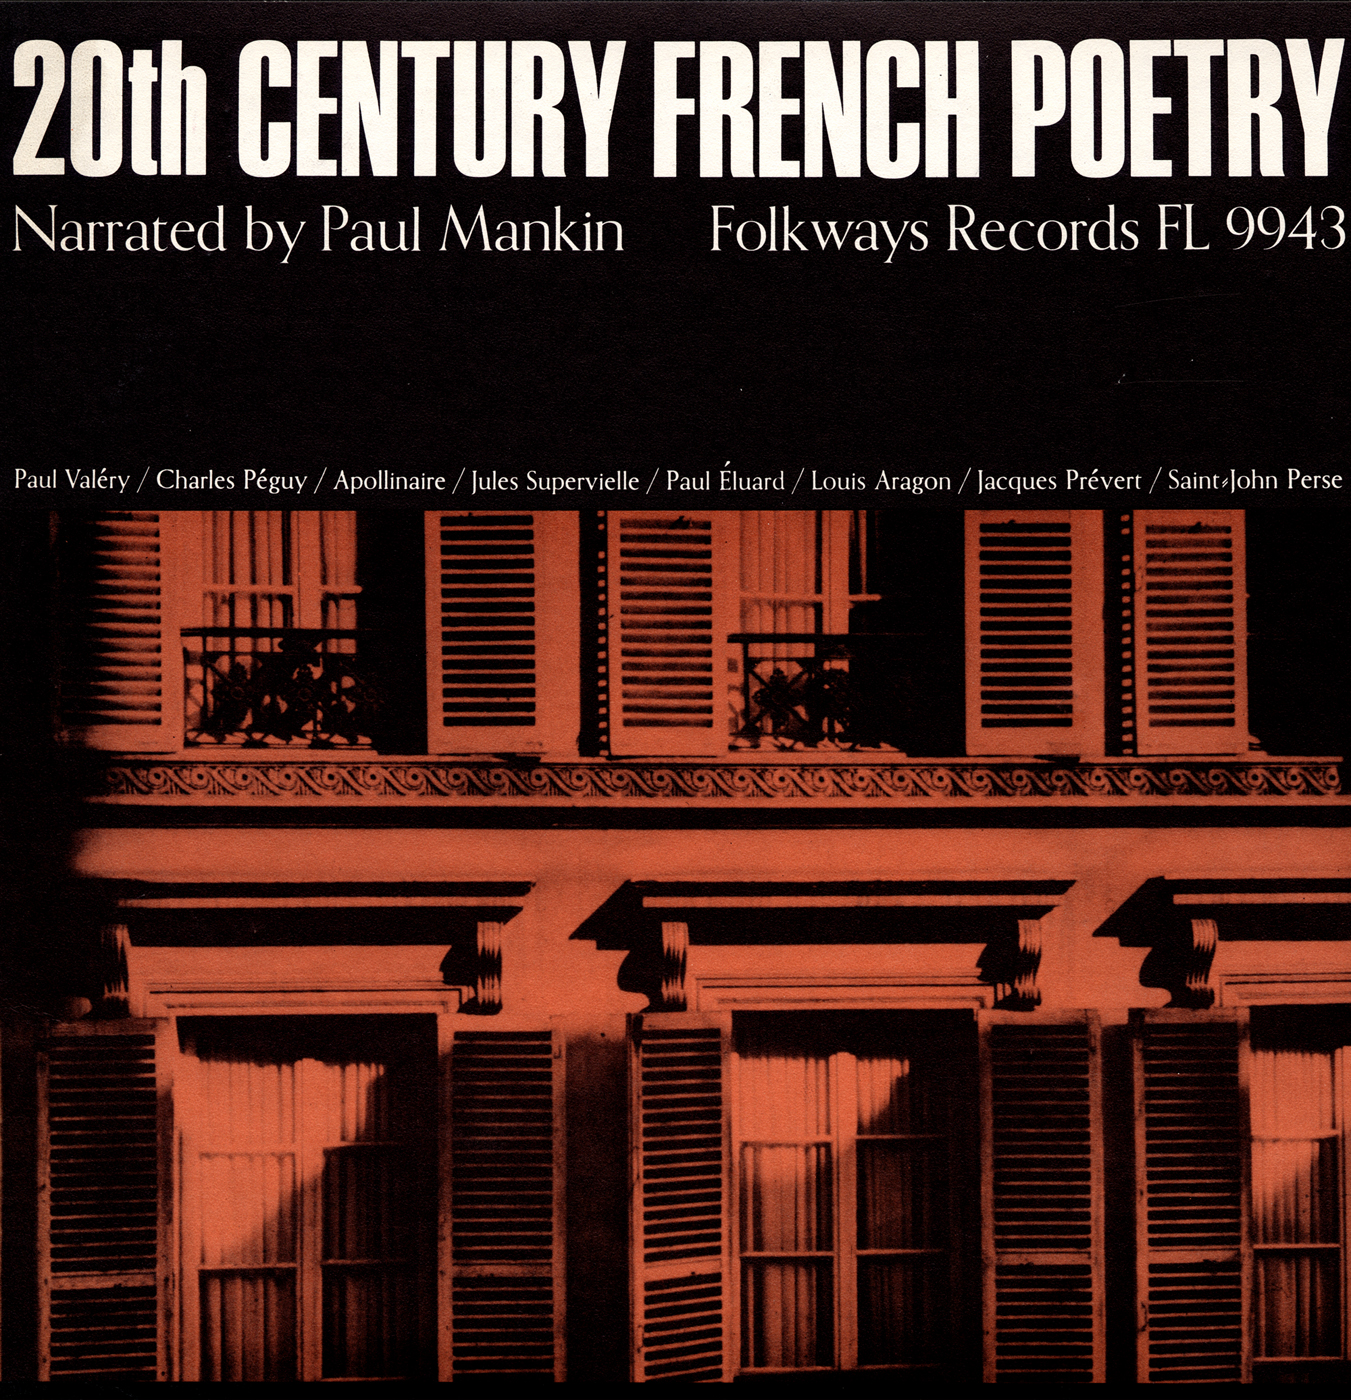 20th Century French Poetry: Narrated by Paul Mankin | Smithsonian